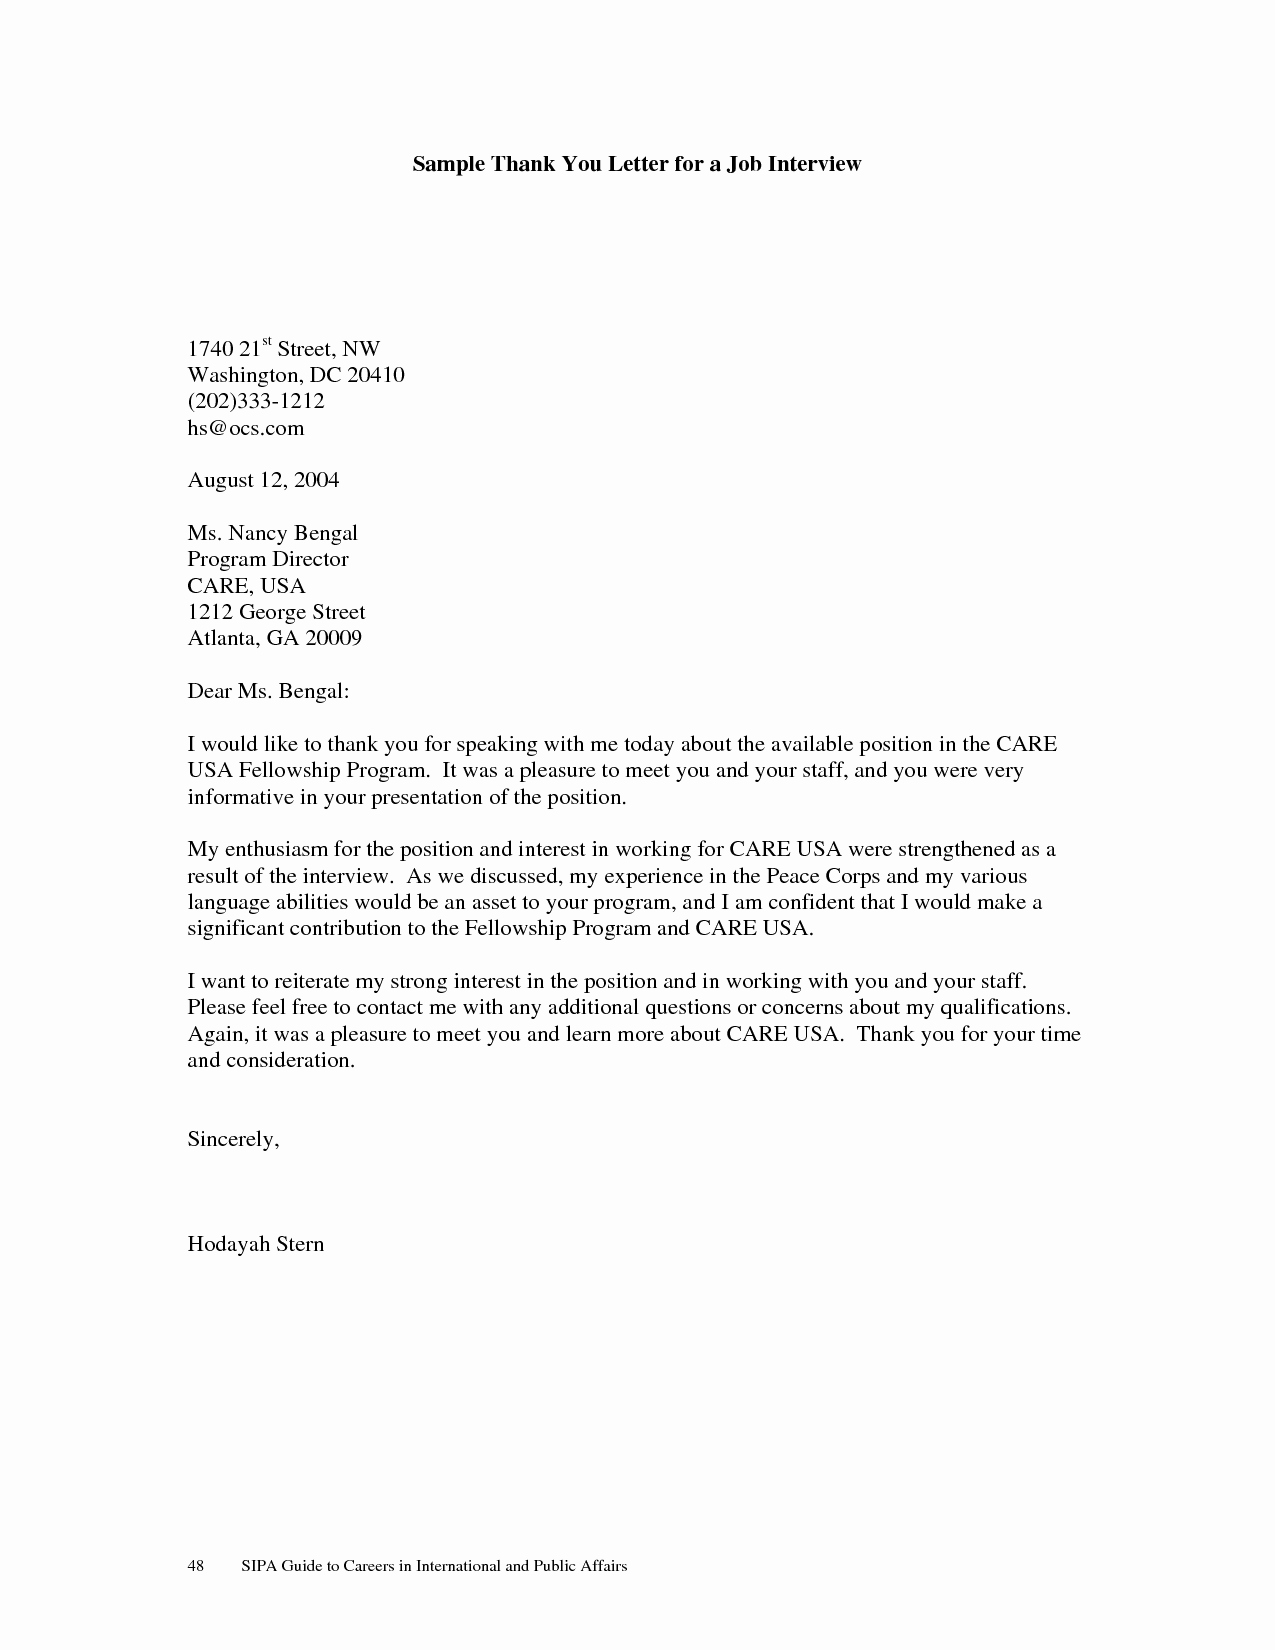 Sample Thank You Letter for Job Interview